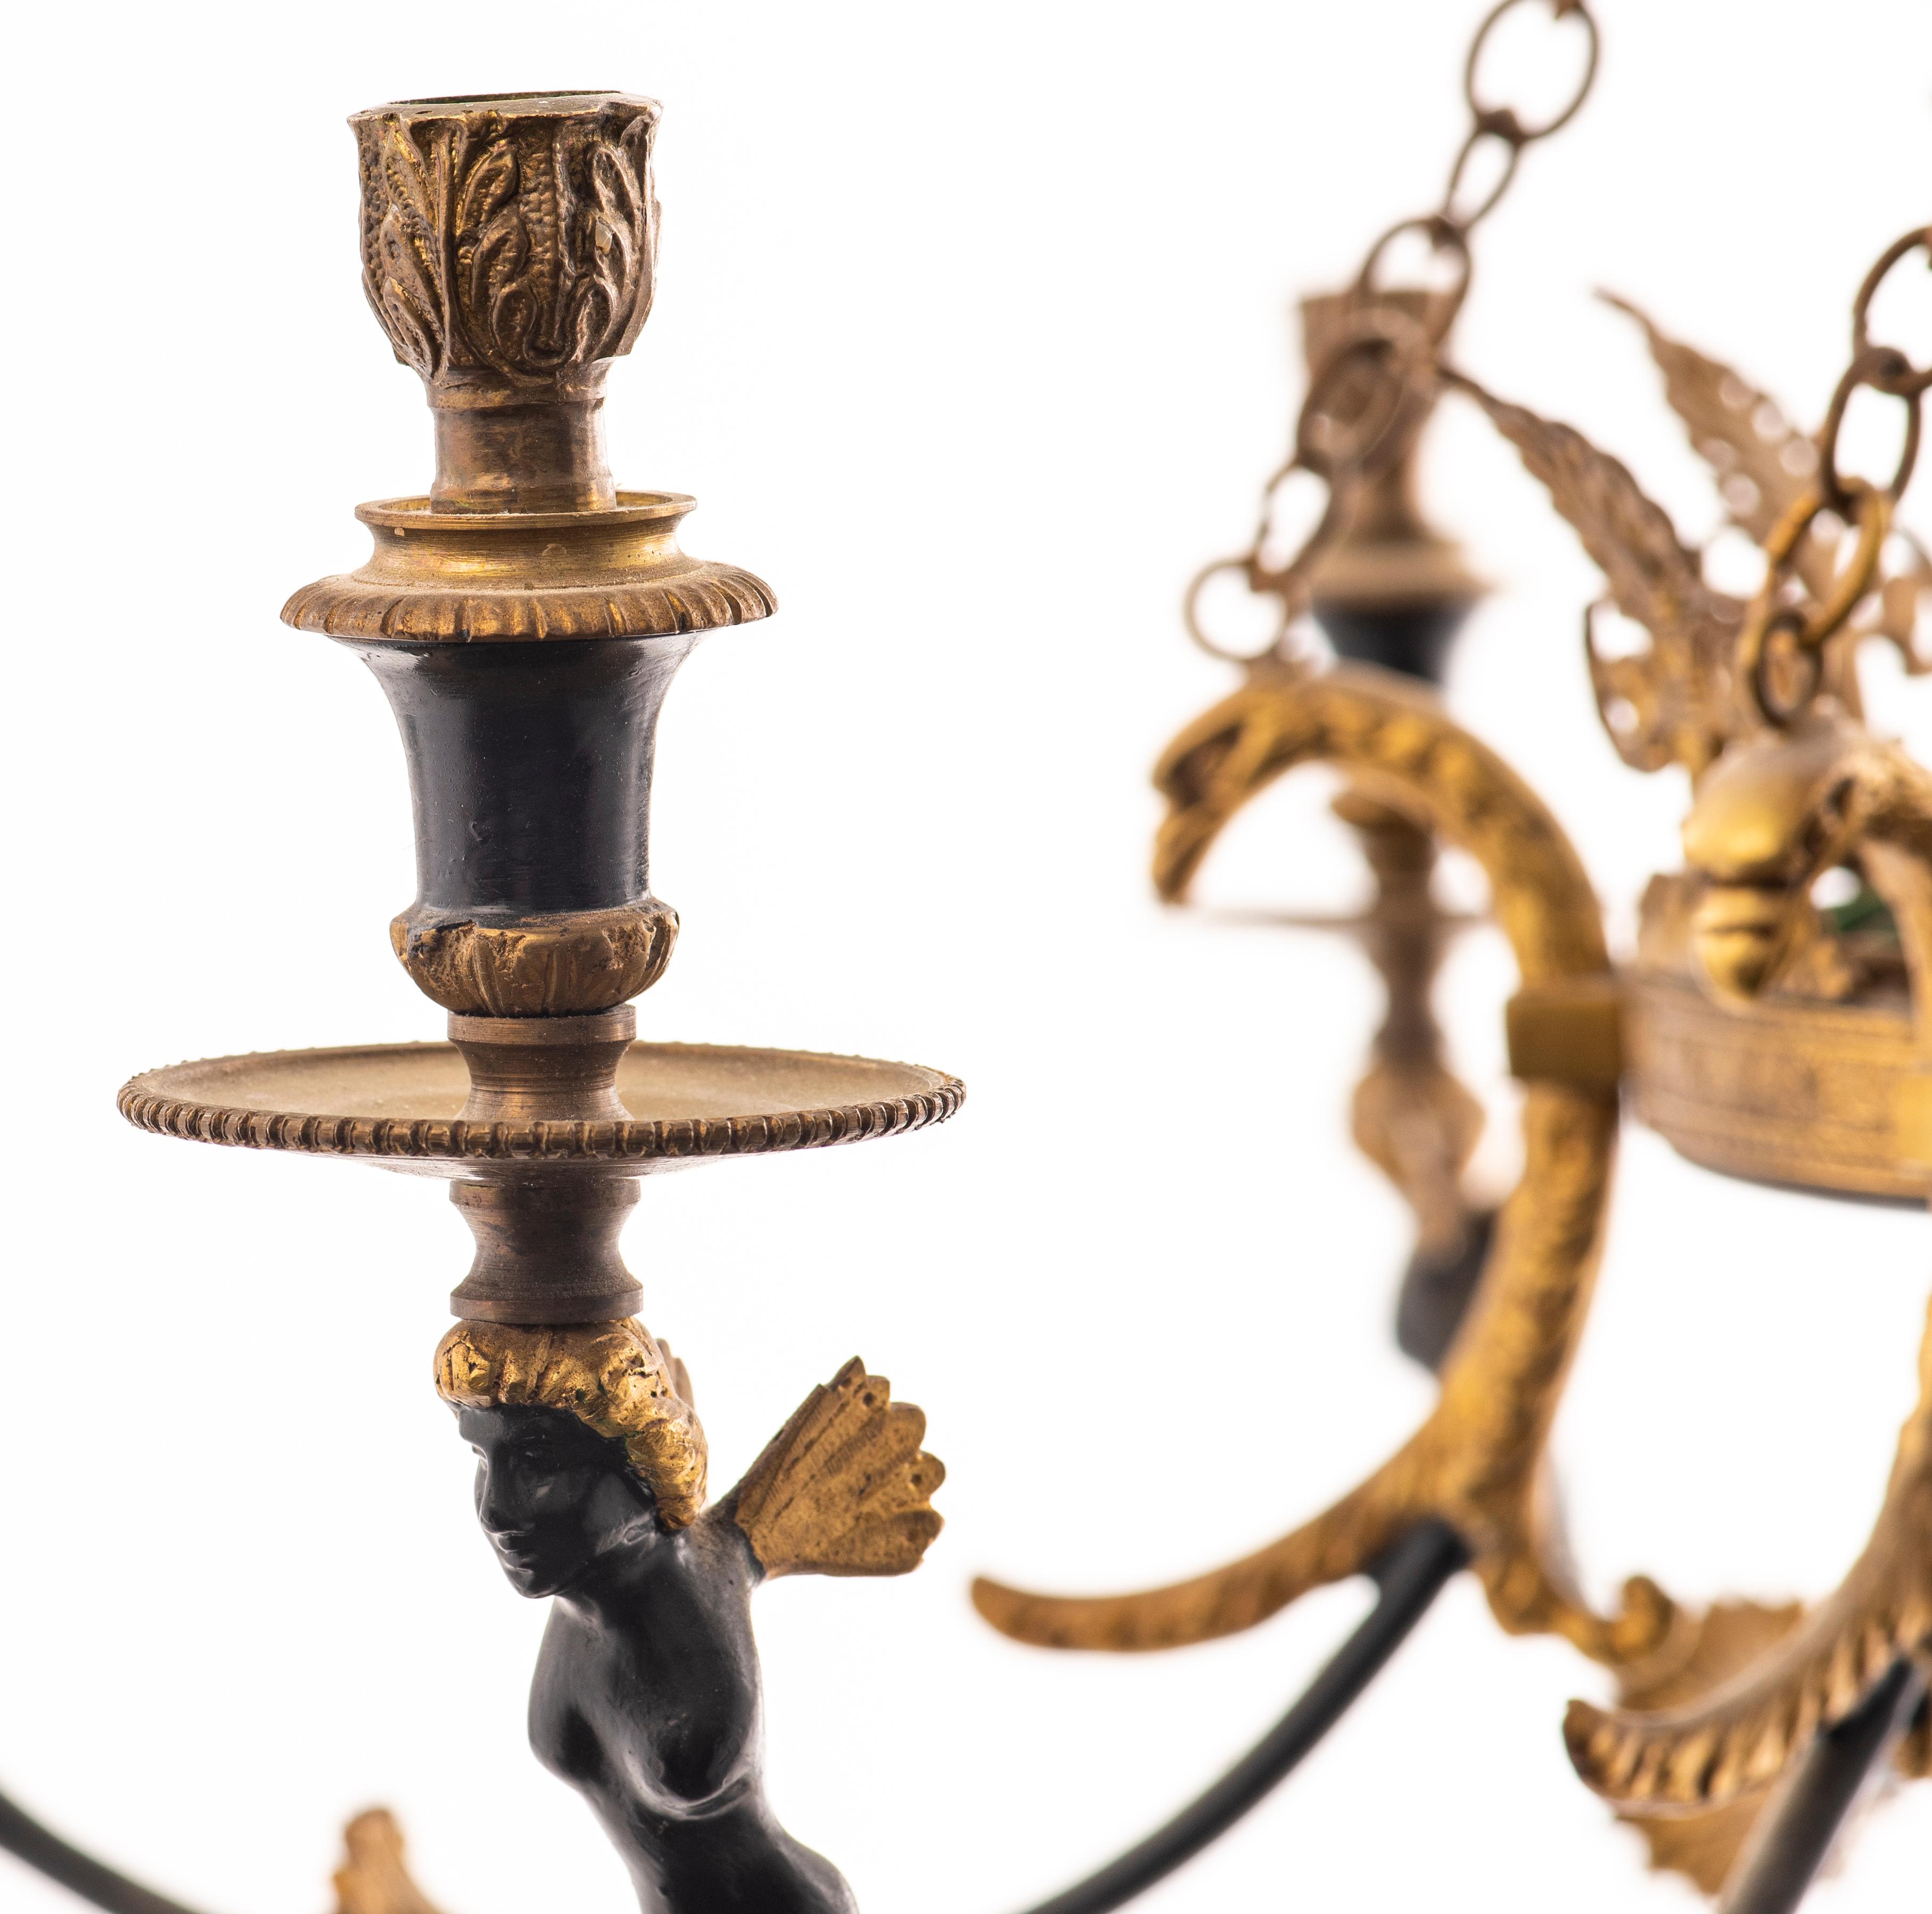 Swedish Empire style gilt and patinated bronze six-light chandelier, the arms with eagle and winged figures around a foliate accent, the standard with palmette and star motifs.
Dimensions: 25” height x 29.5” diameter.
  